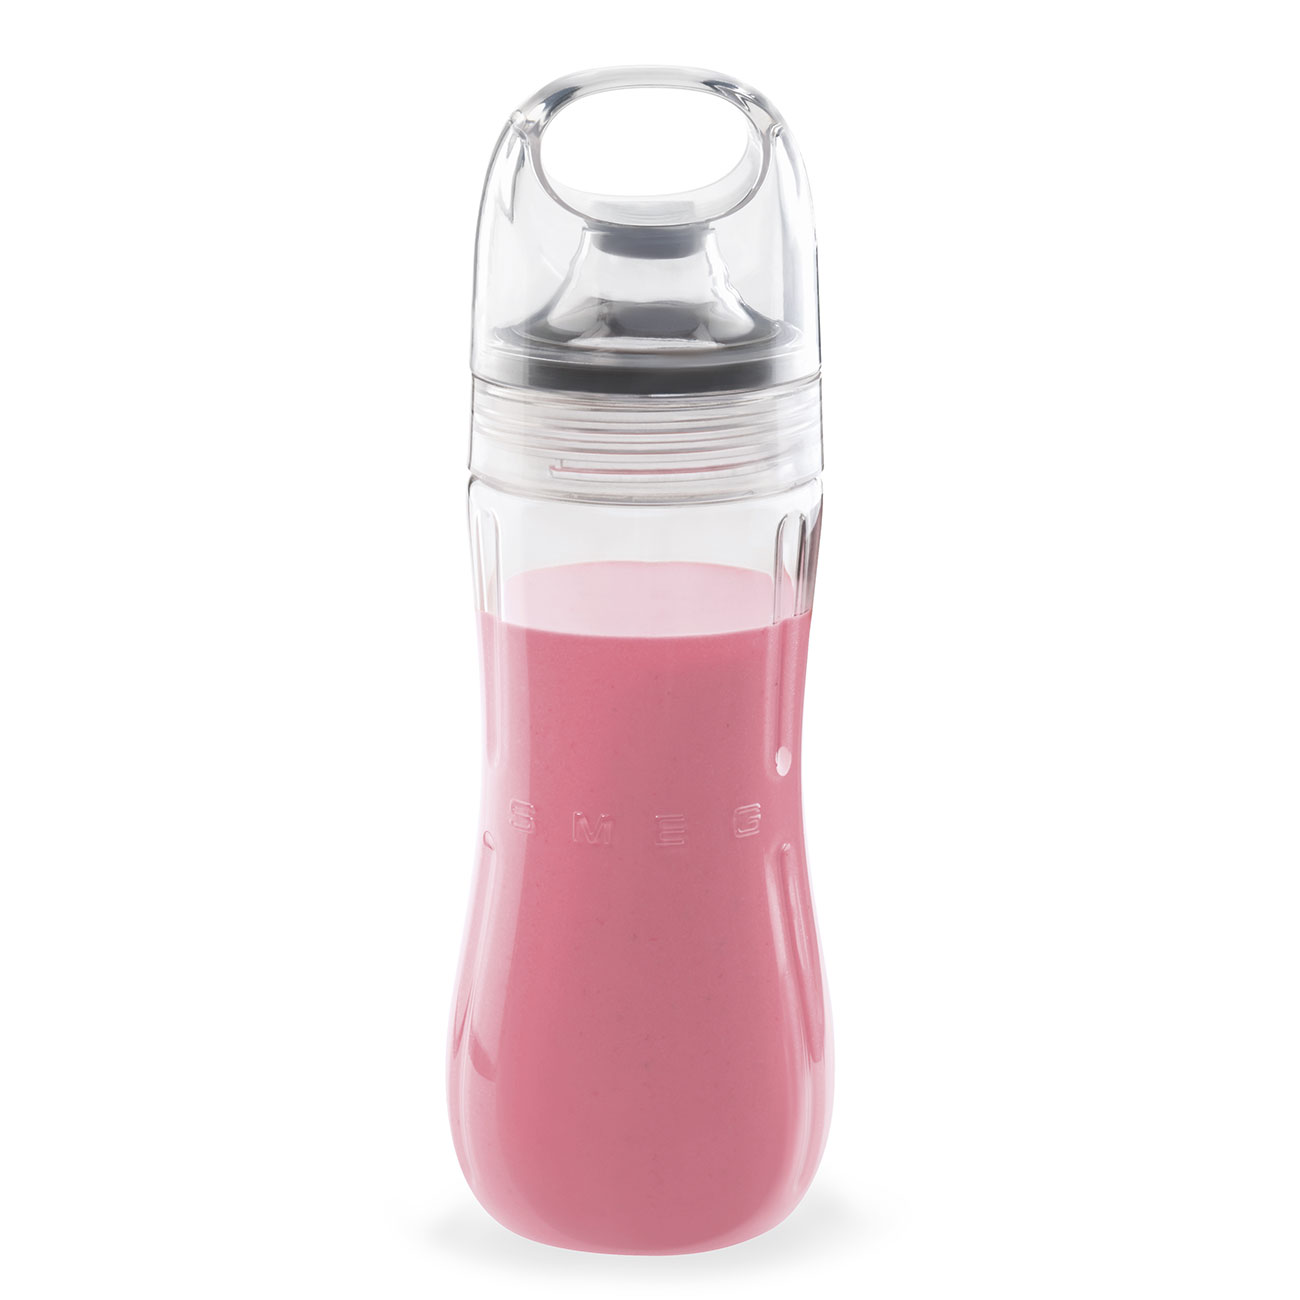 Bottle To Go with blades accessory for Smeg Blender - BGF01_3